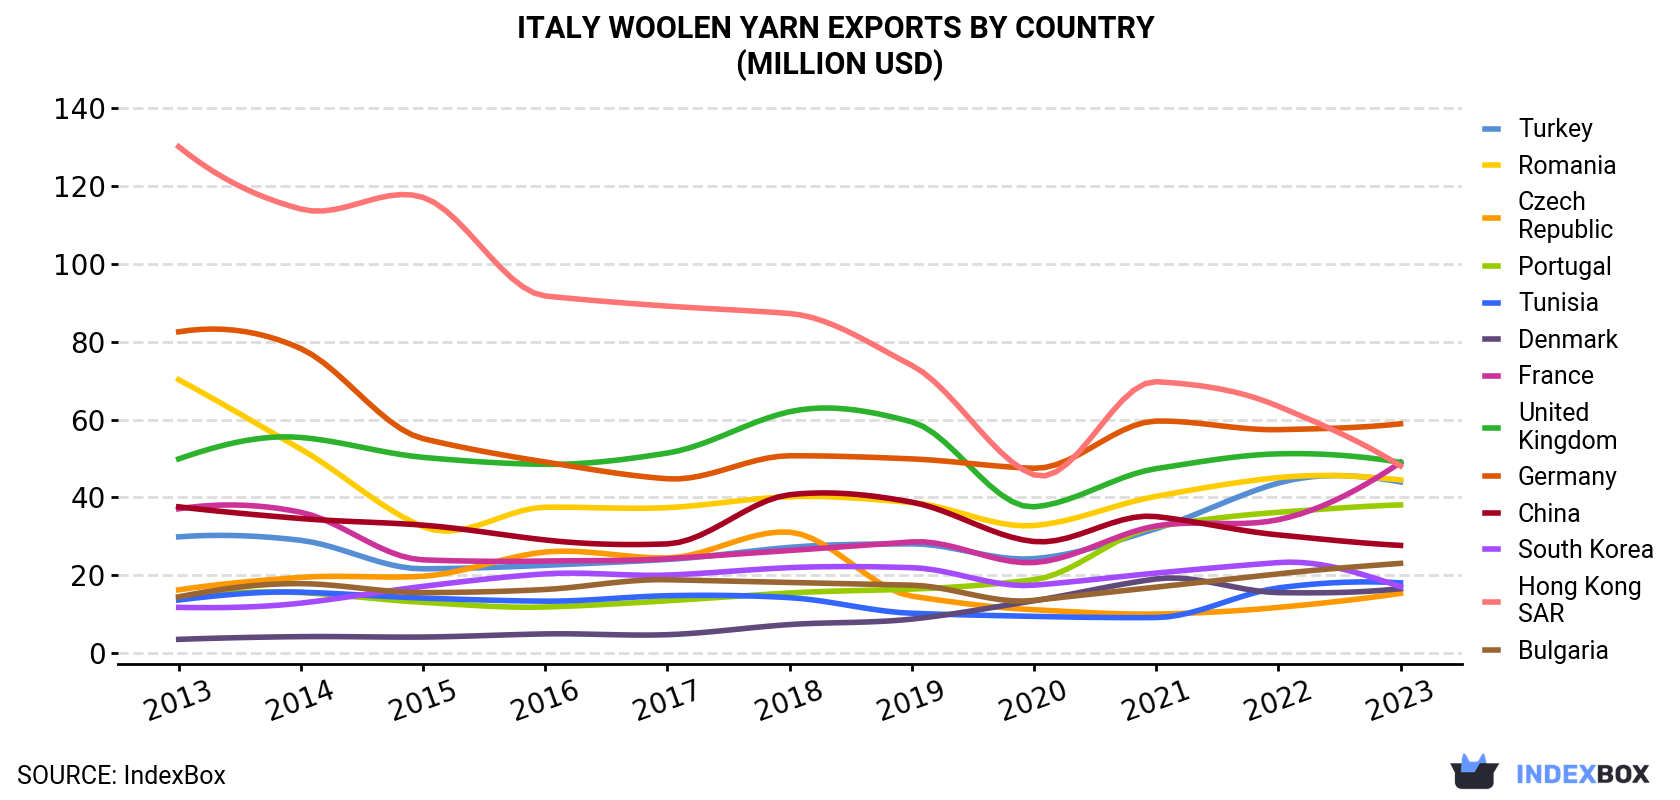 Italy Woolen Yarn Exports By Country (Million USD)